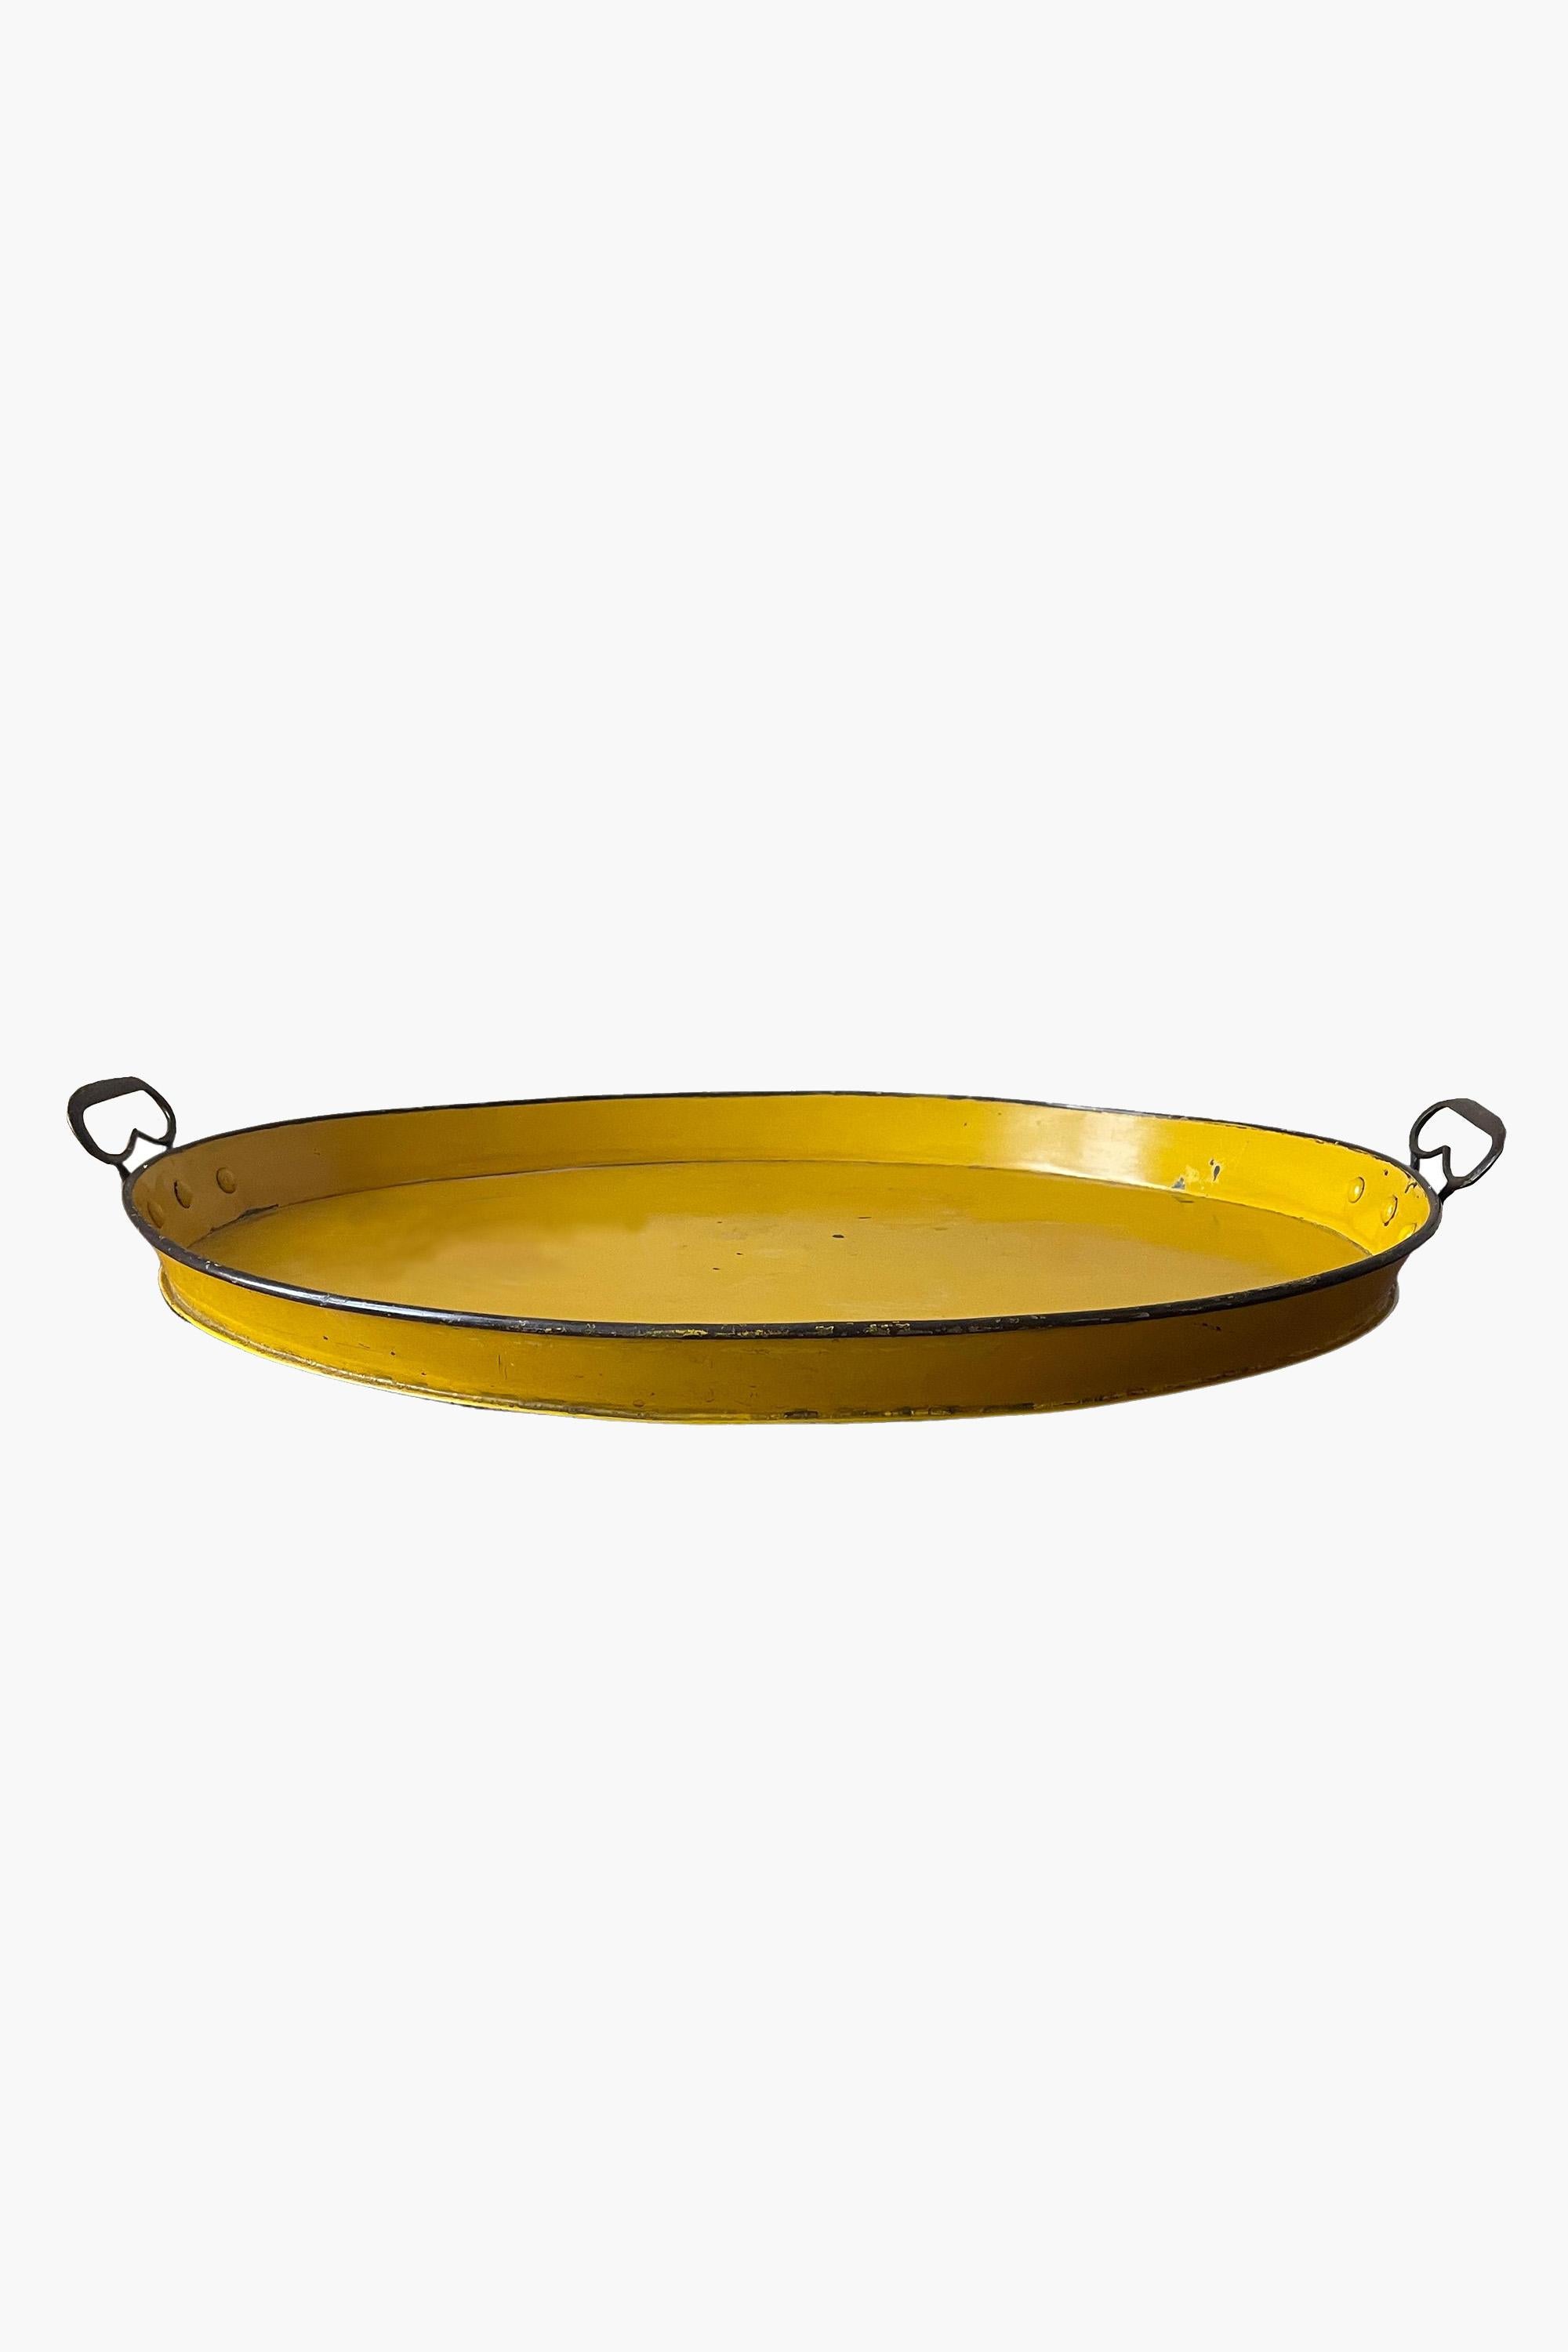 Large 19th Century Swedish Toleware Tray

Yellow painted oval tin tray in lovely original condition. Incredibly useful and generously sized.

Dimensions: W 76cm